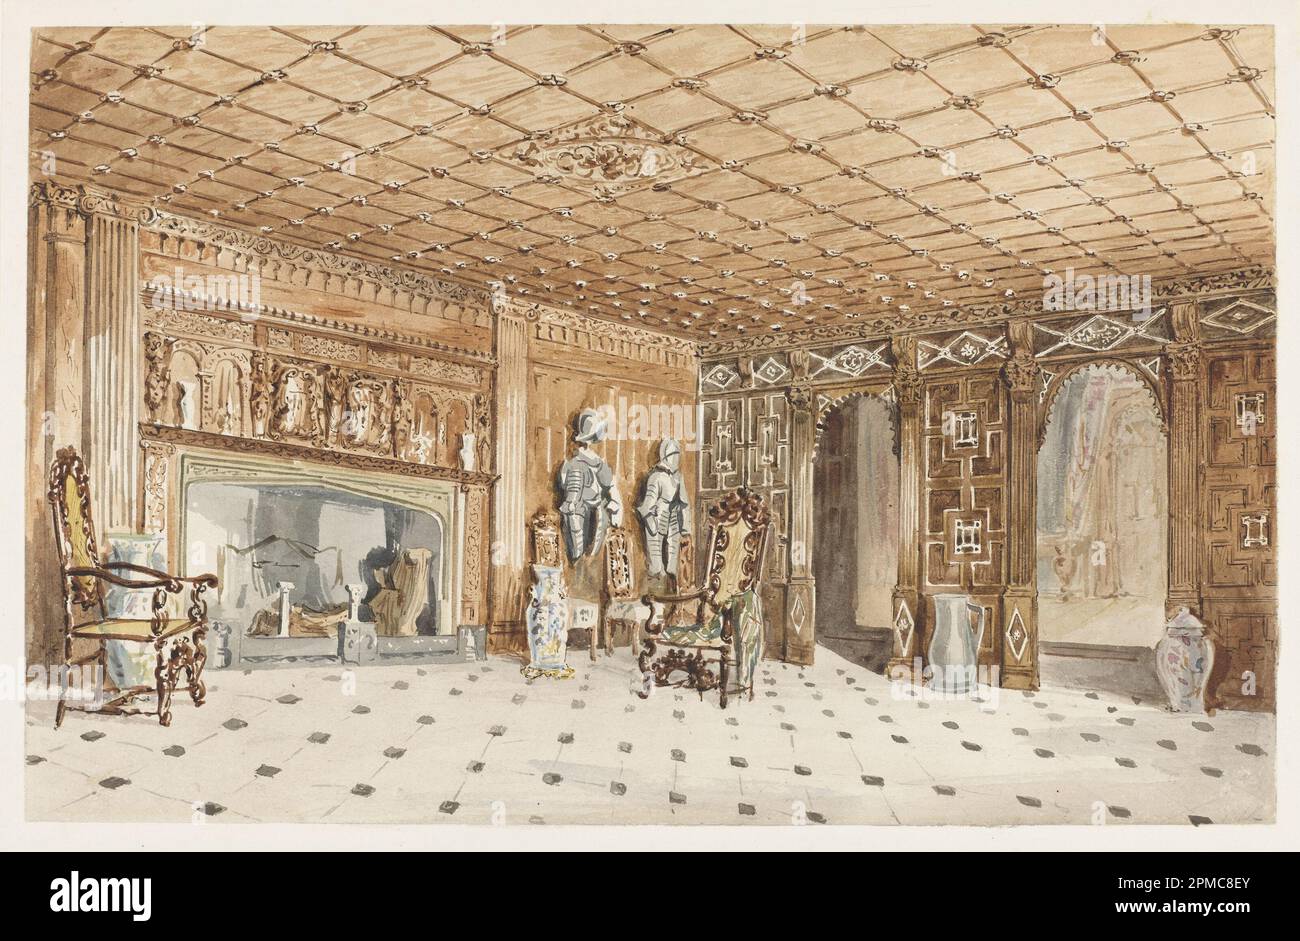 Drawing, The Entrance Hall, East Sutton Place, Kent; Charles James Richardson (British, 1806 – 1871); brush and watercolor, graphite on white wove paper; Frame H x W x D: 39.7 x 50.2 x 2.5 cm (15 5/8 x 19 3/4 x 1 in.) Sheet: 19.5 x 30.6 cm (7 11/16 x 12 1/16 in.); Thaw Collection; 2007-27-33 Stock Photo